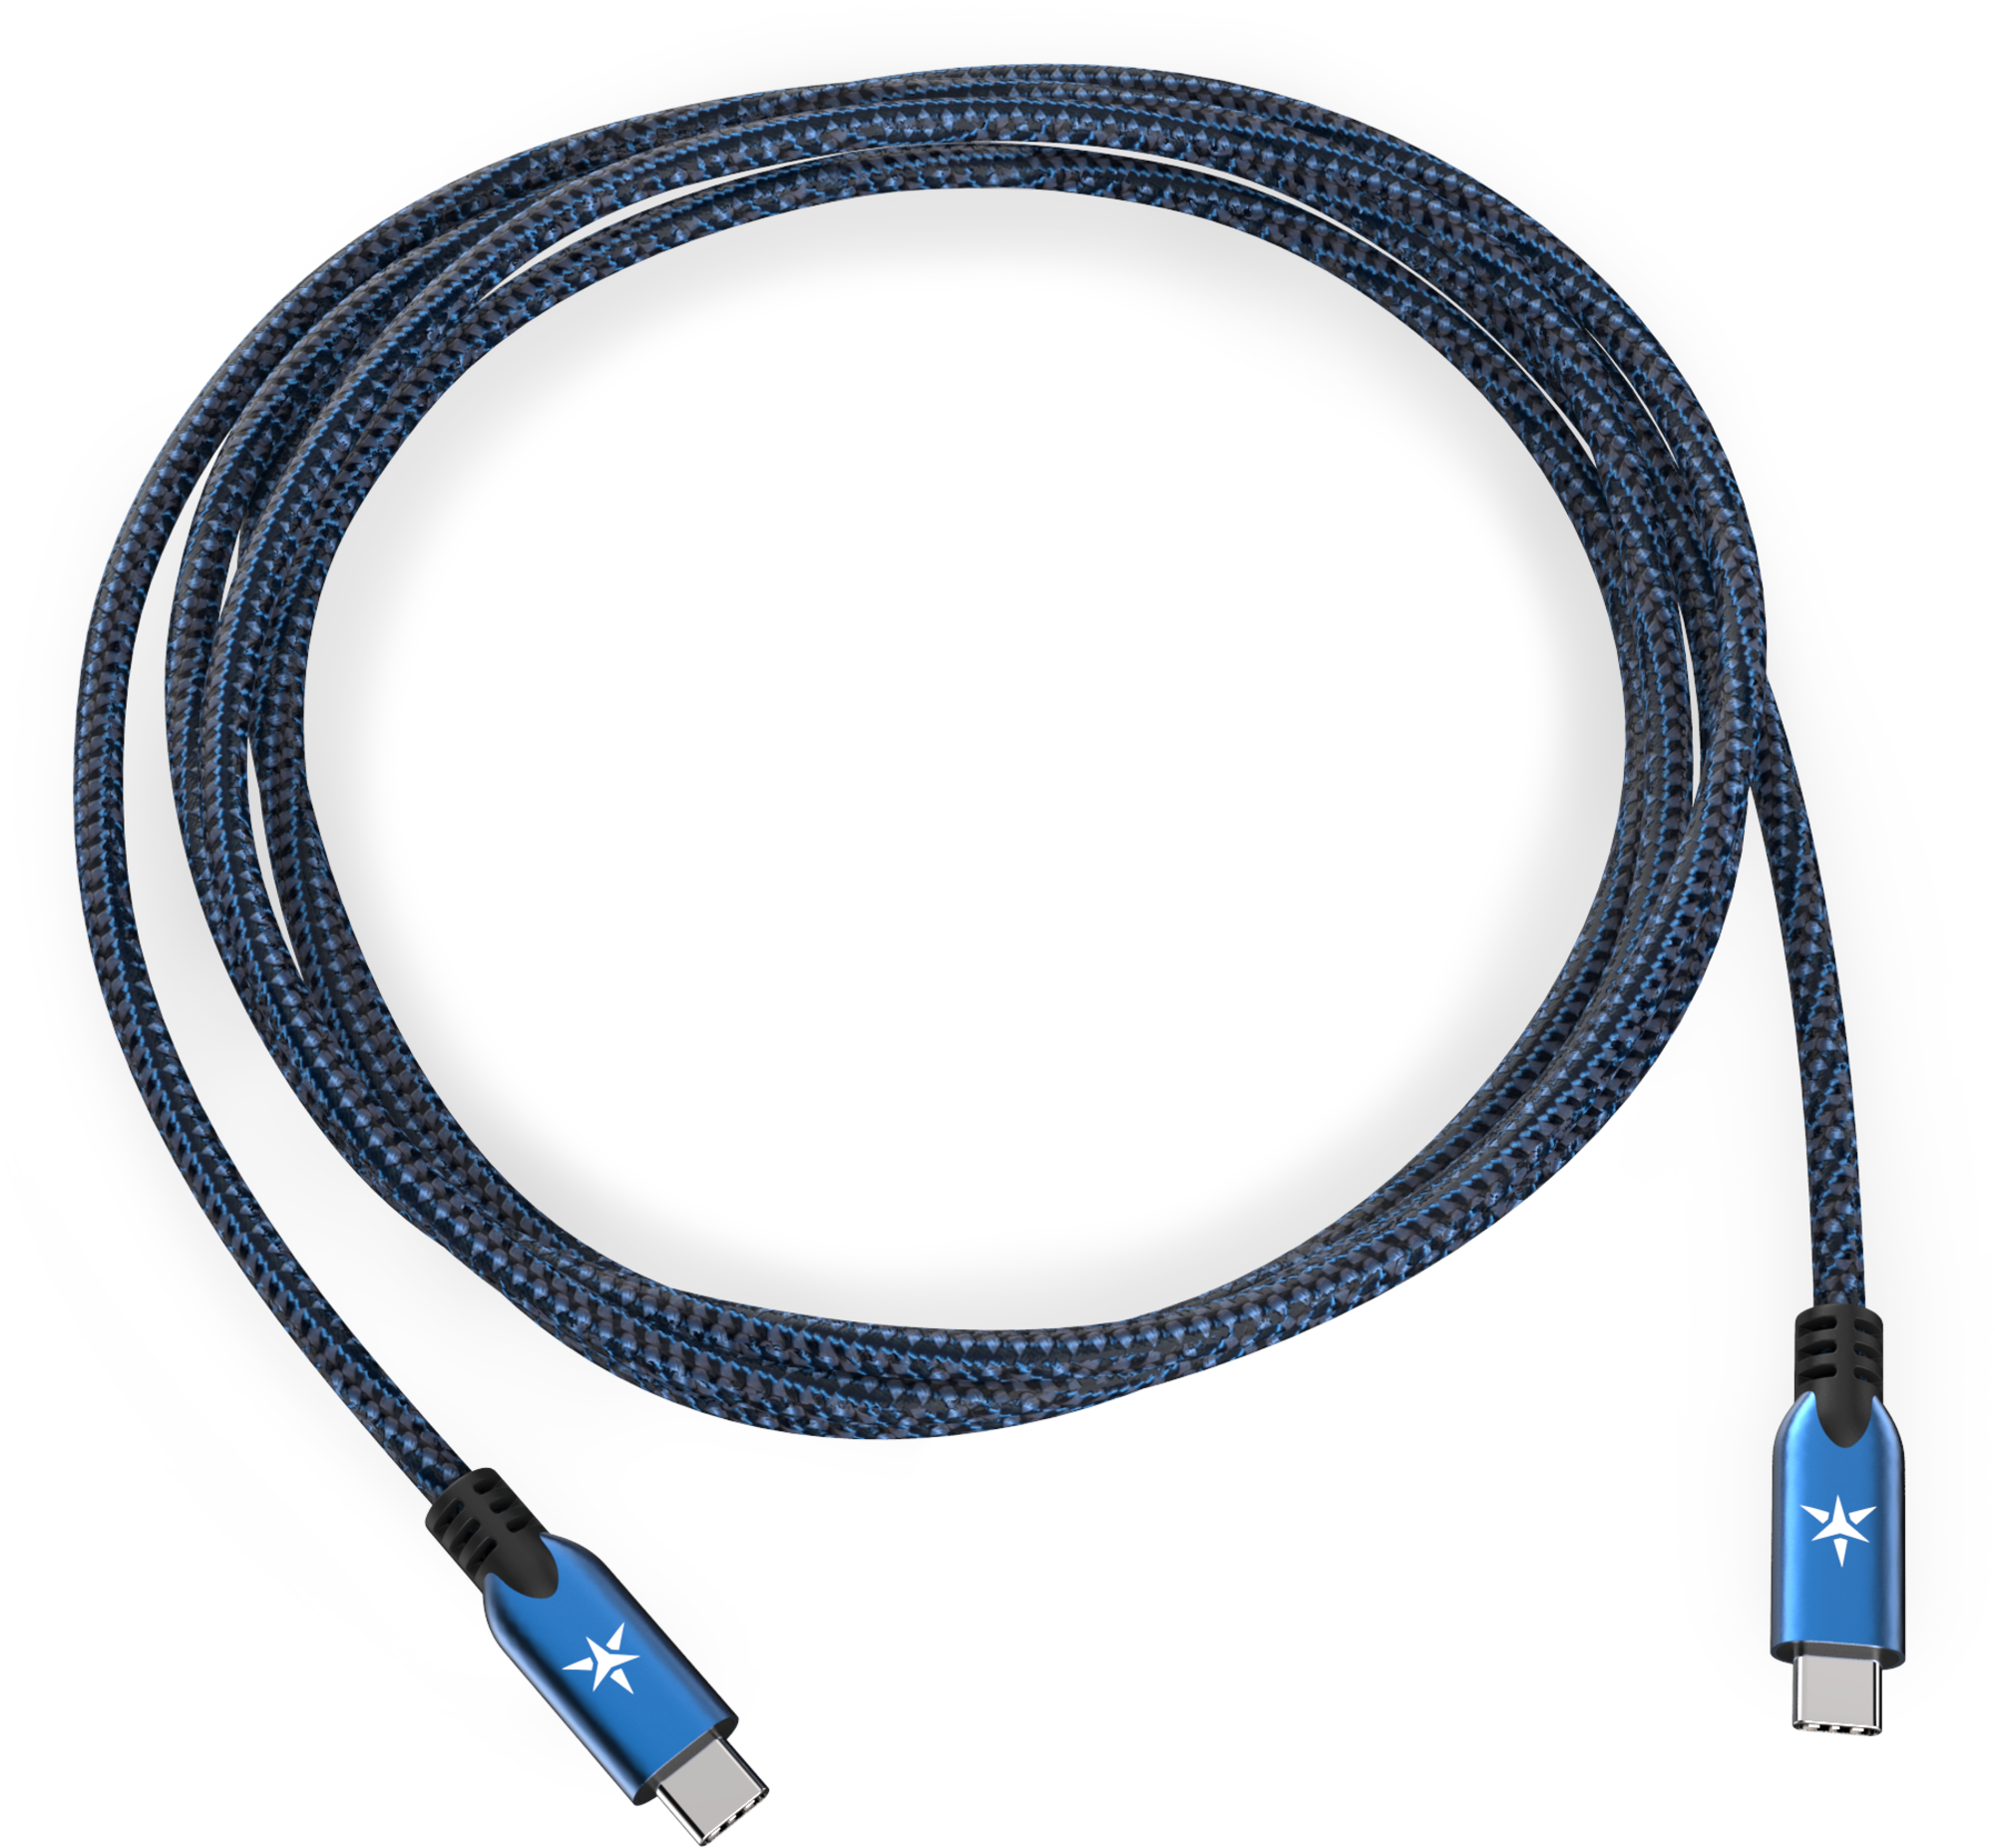 USB-C 3.1 Charge Cable (2m)